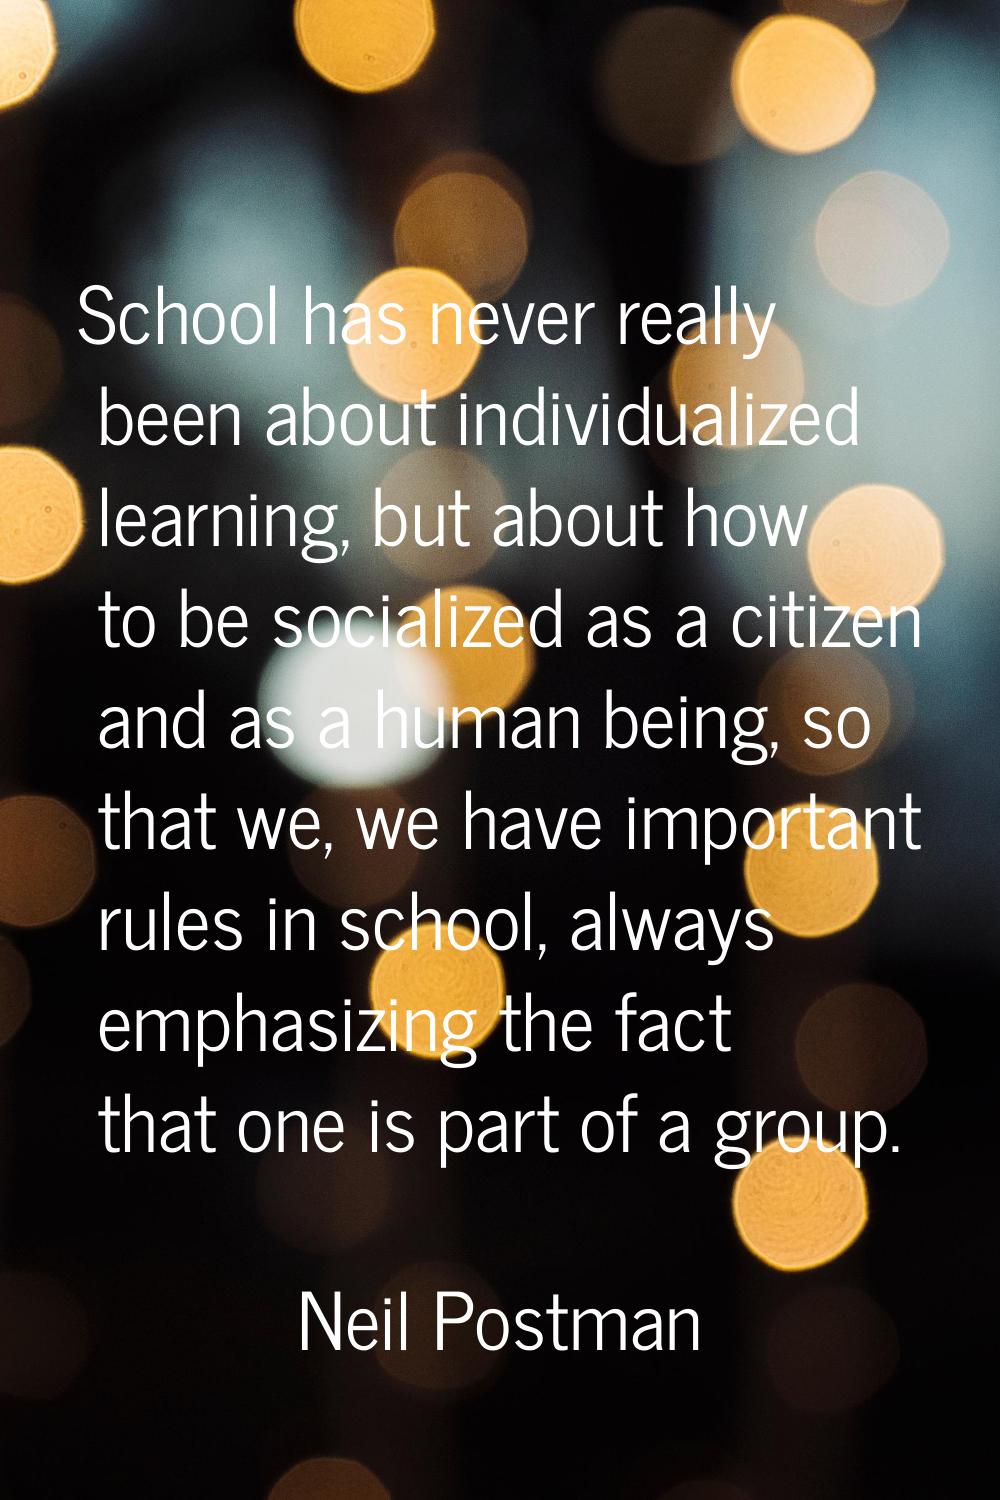 School has never really been about individualized learning, but about how to be socialized as a cit